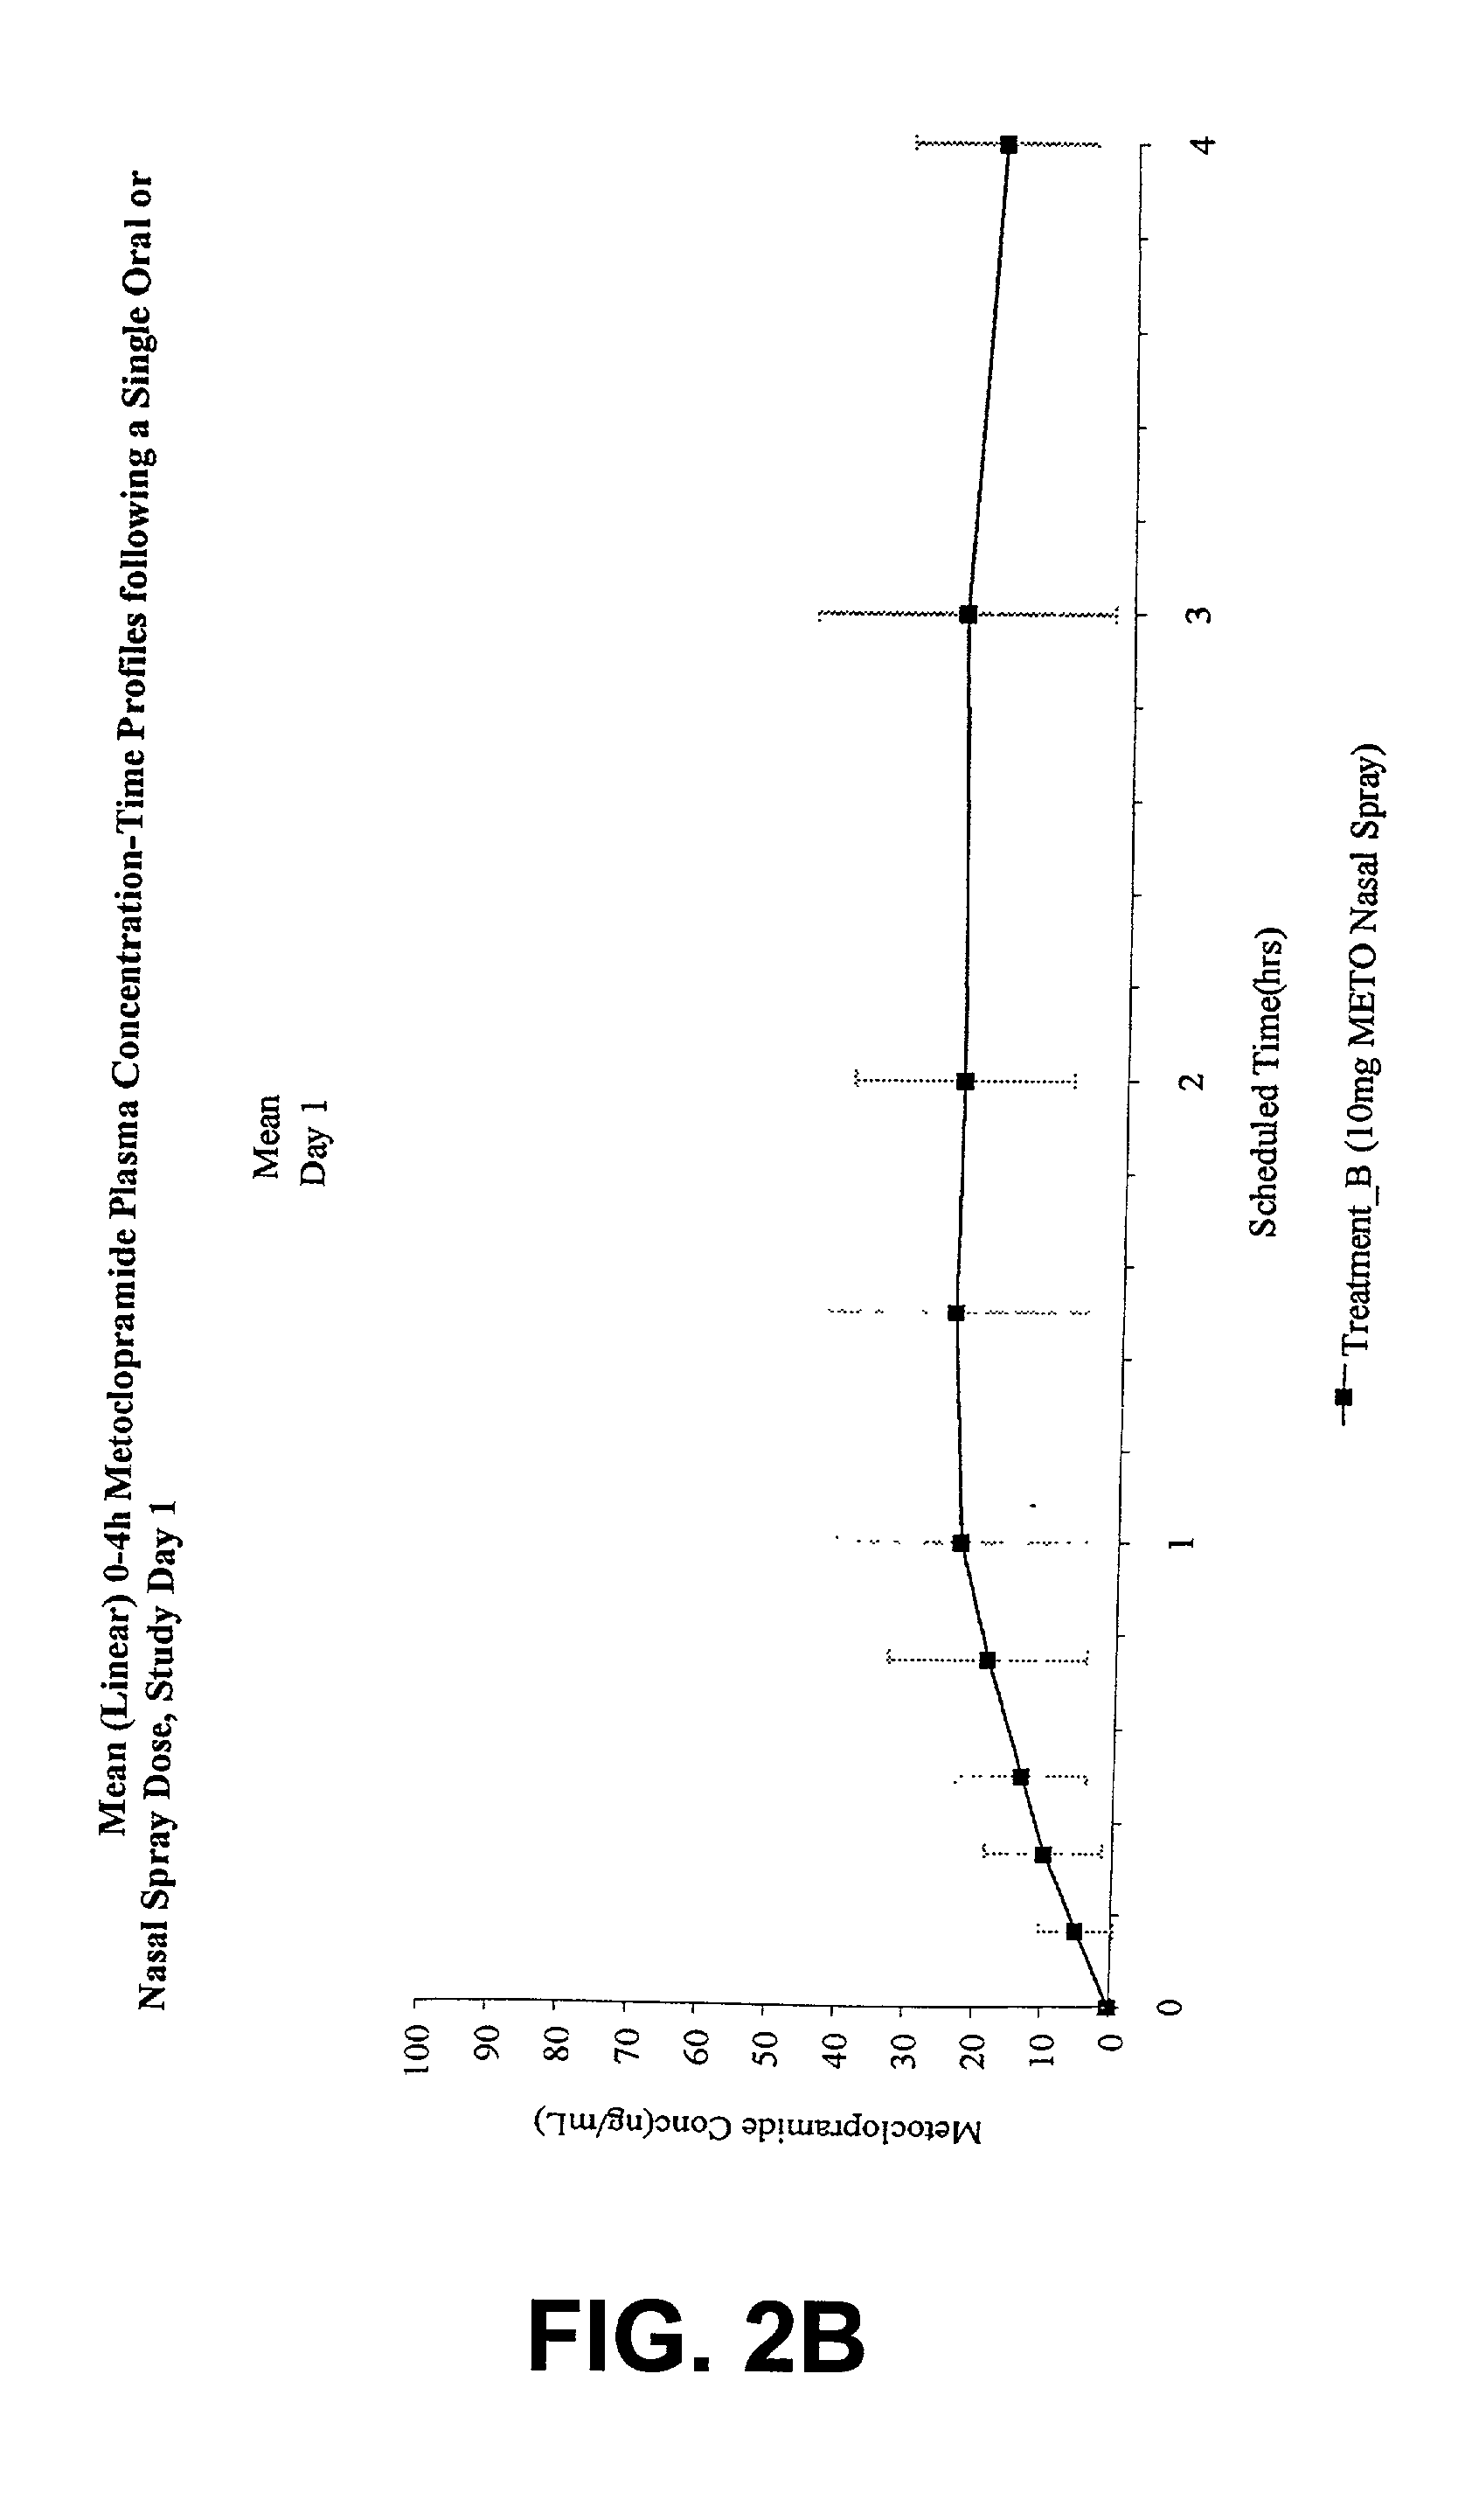 Nasal administration of agents for the treatment of gastroparesis